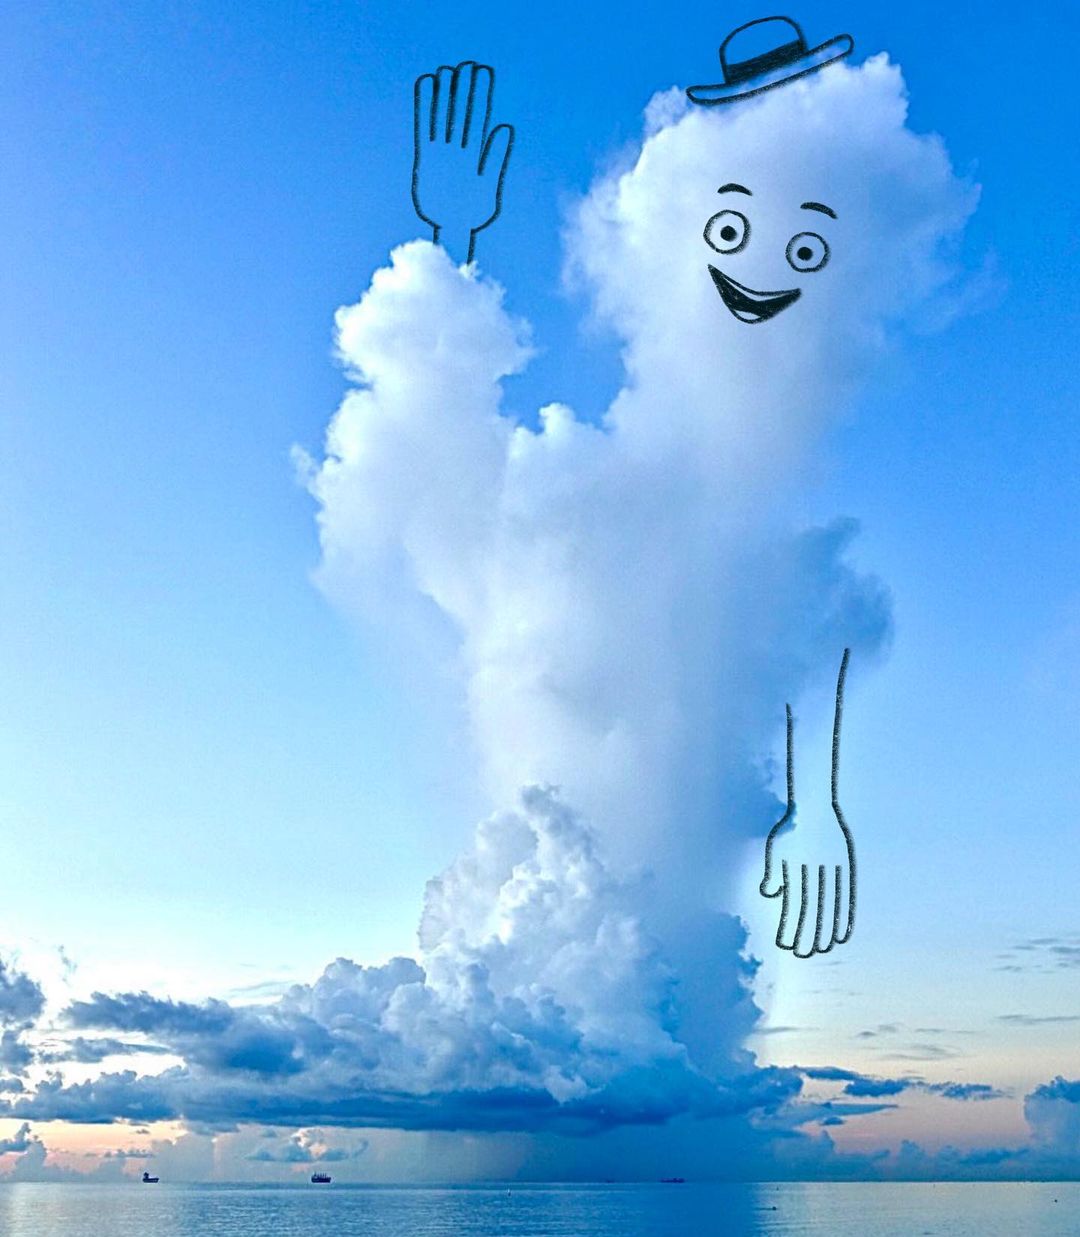 Clouds Turned Into Amusing Characters By Chris Judge (18)